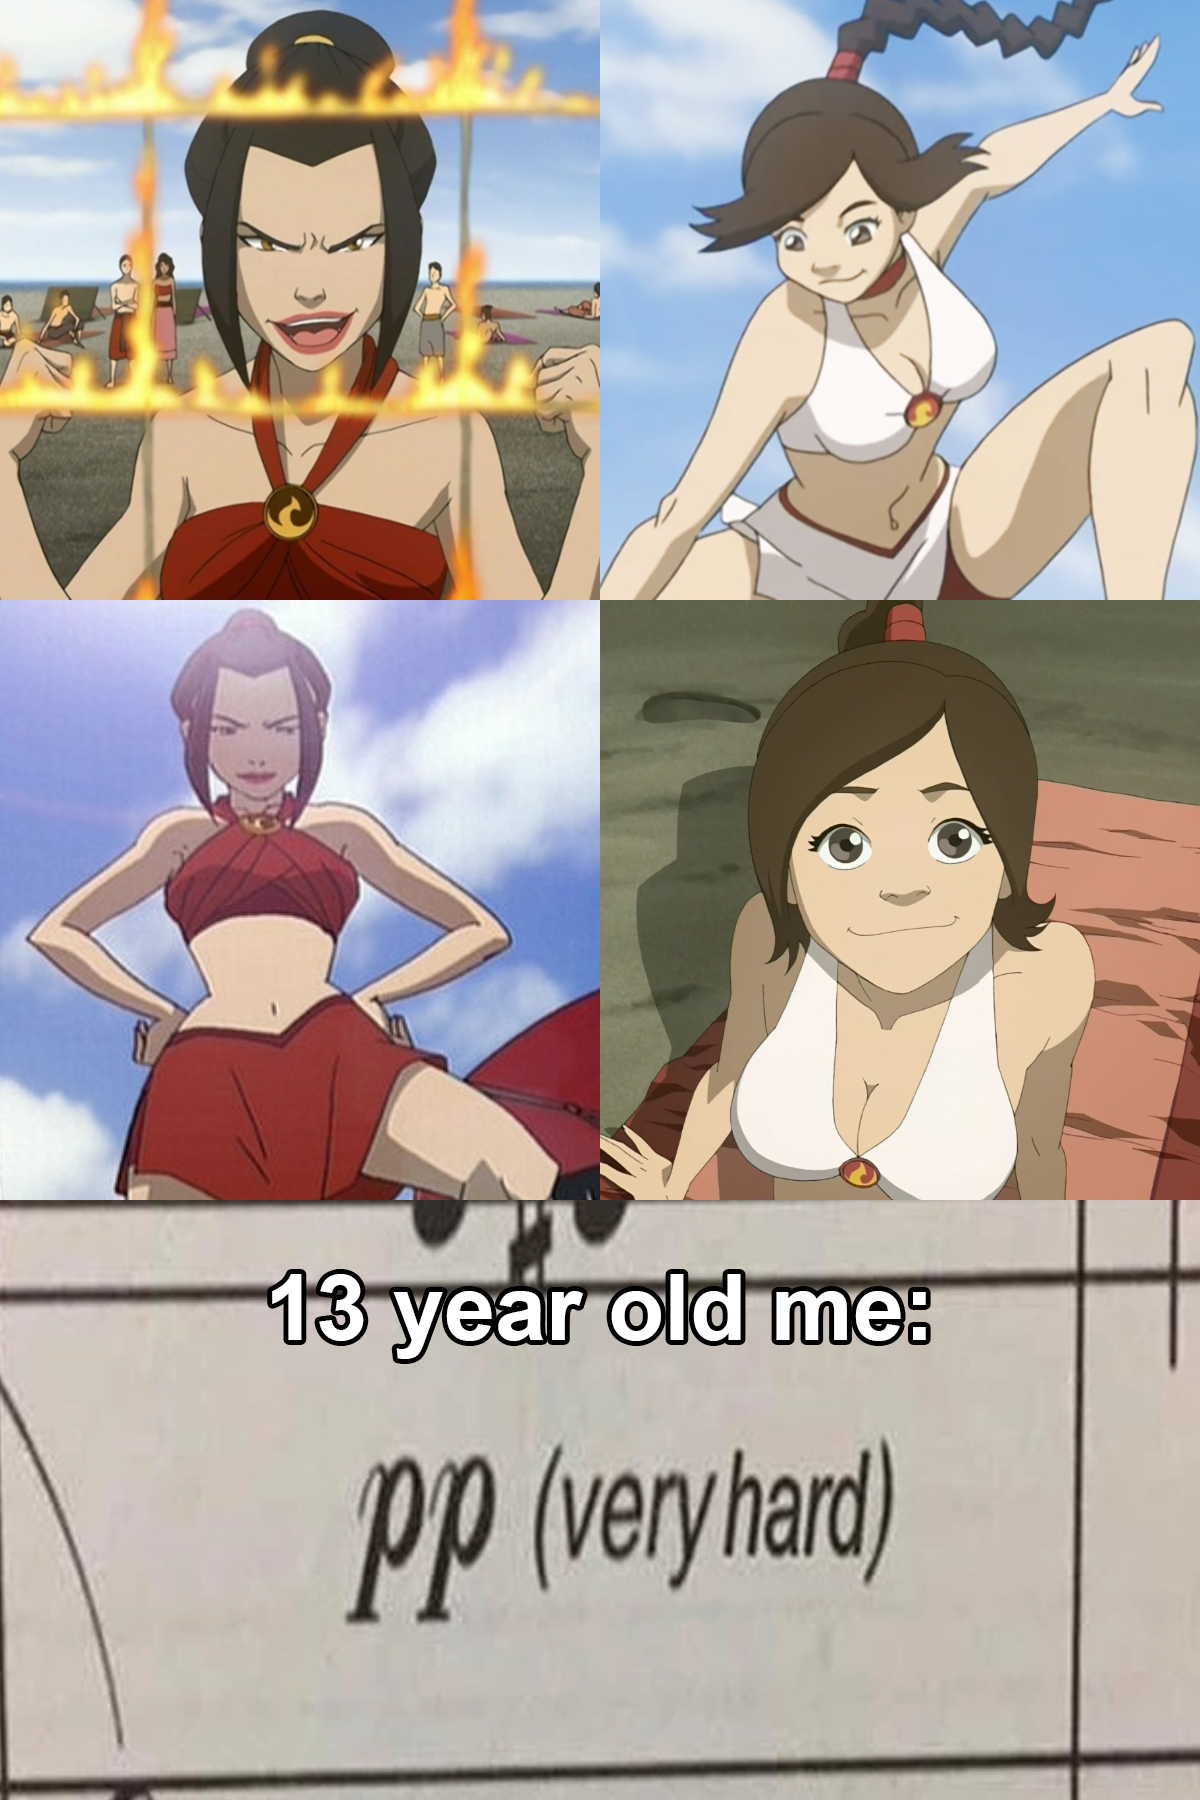 Avatar made me hit puberty.